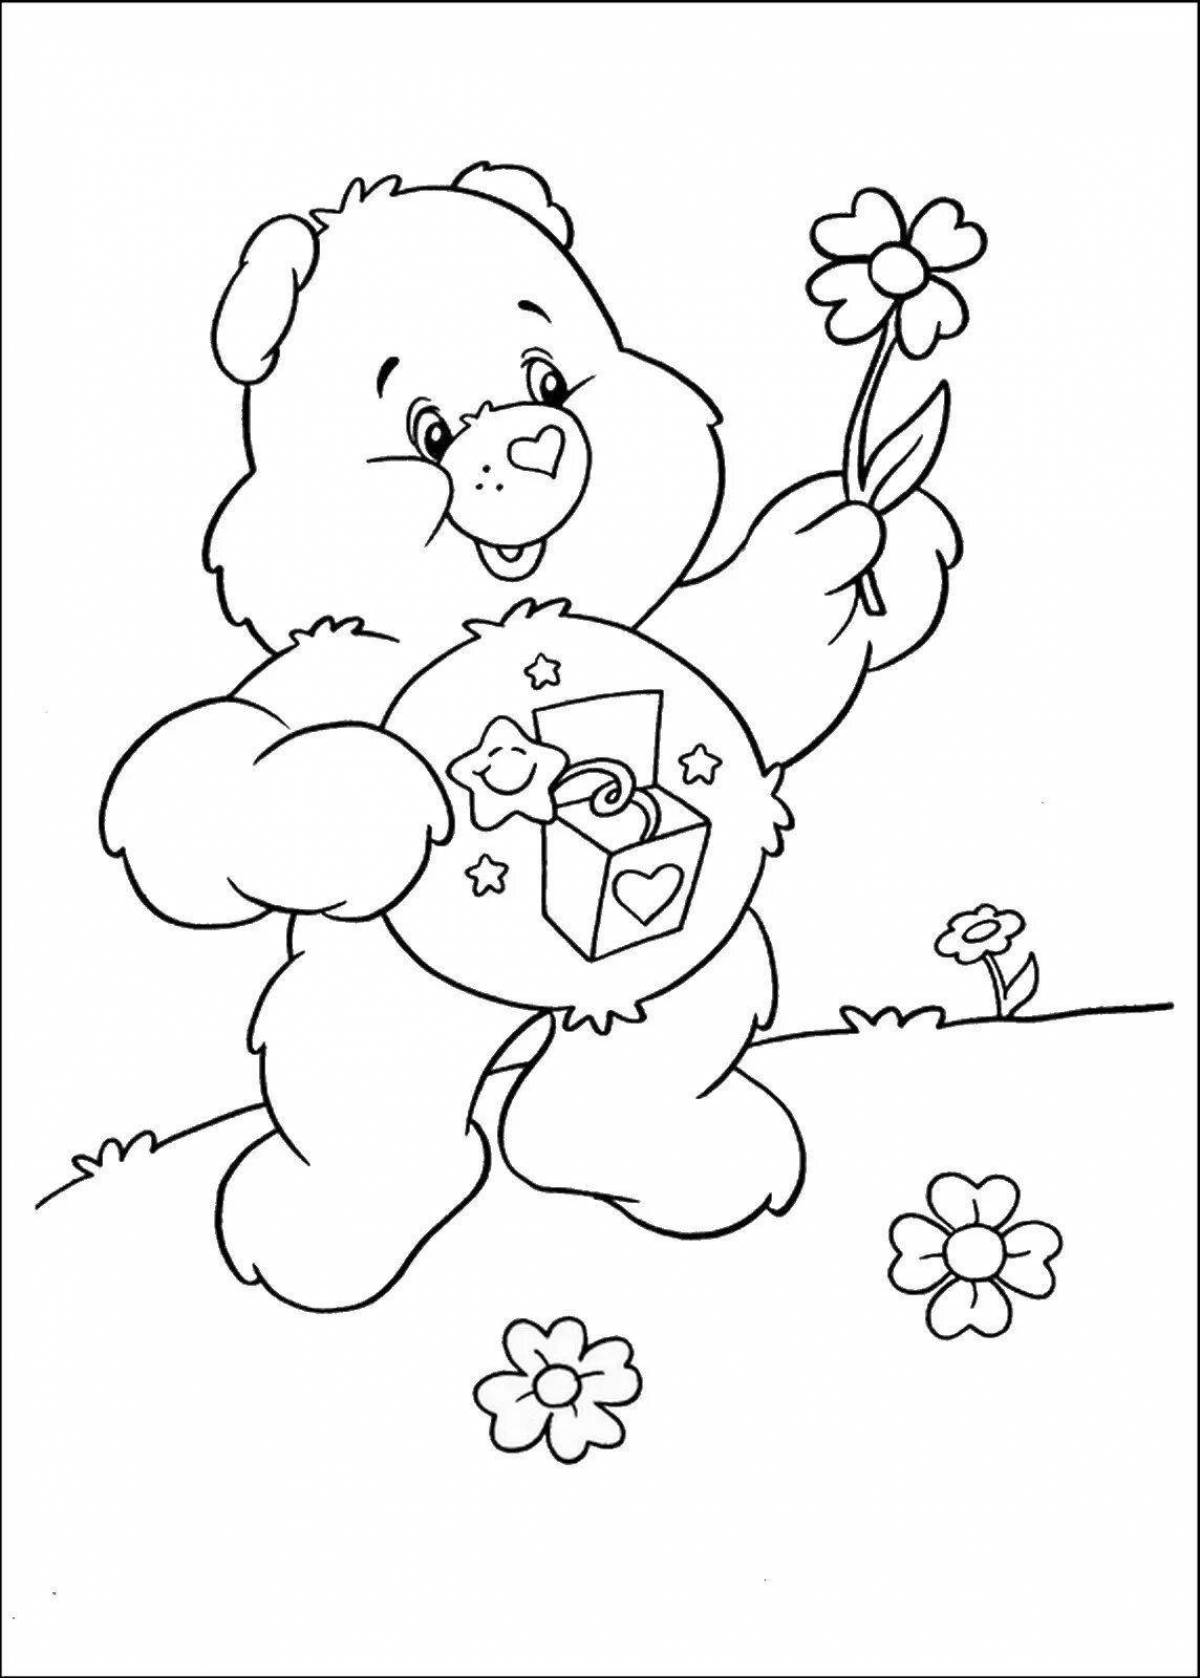 Bright bear with flowers